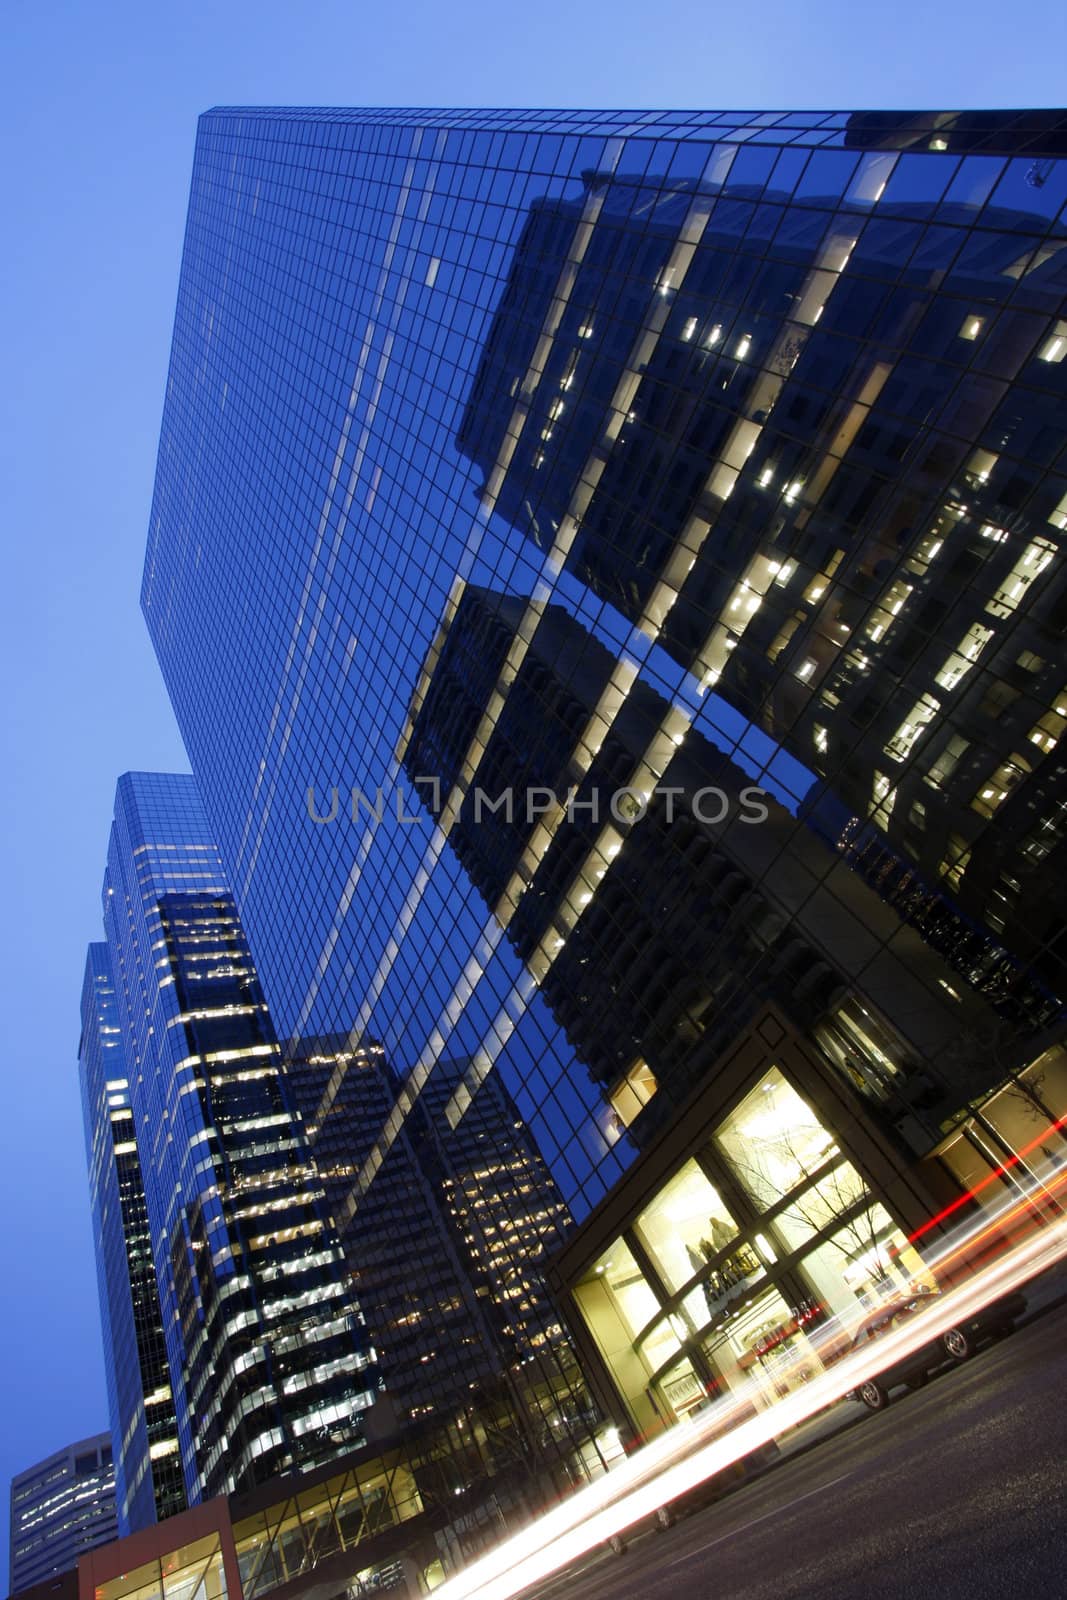 Modern urban architecture
Low Light photography   (LLP)